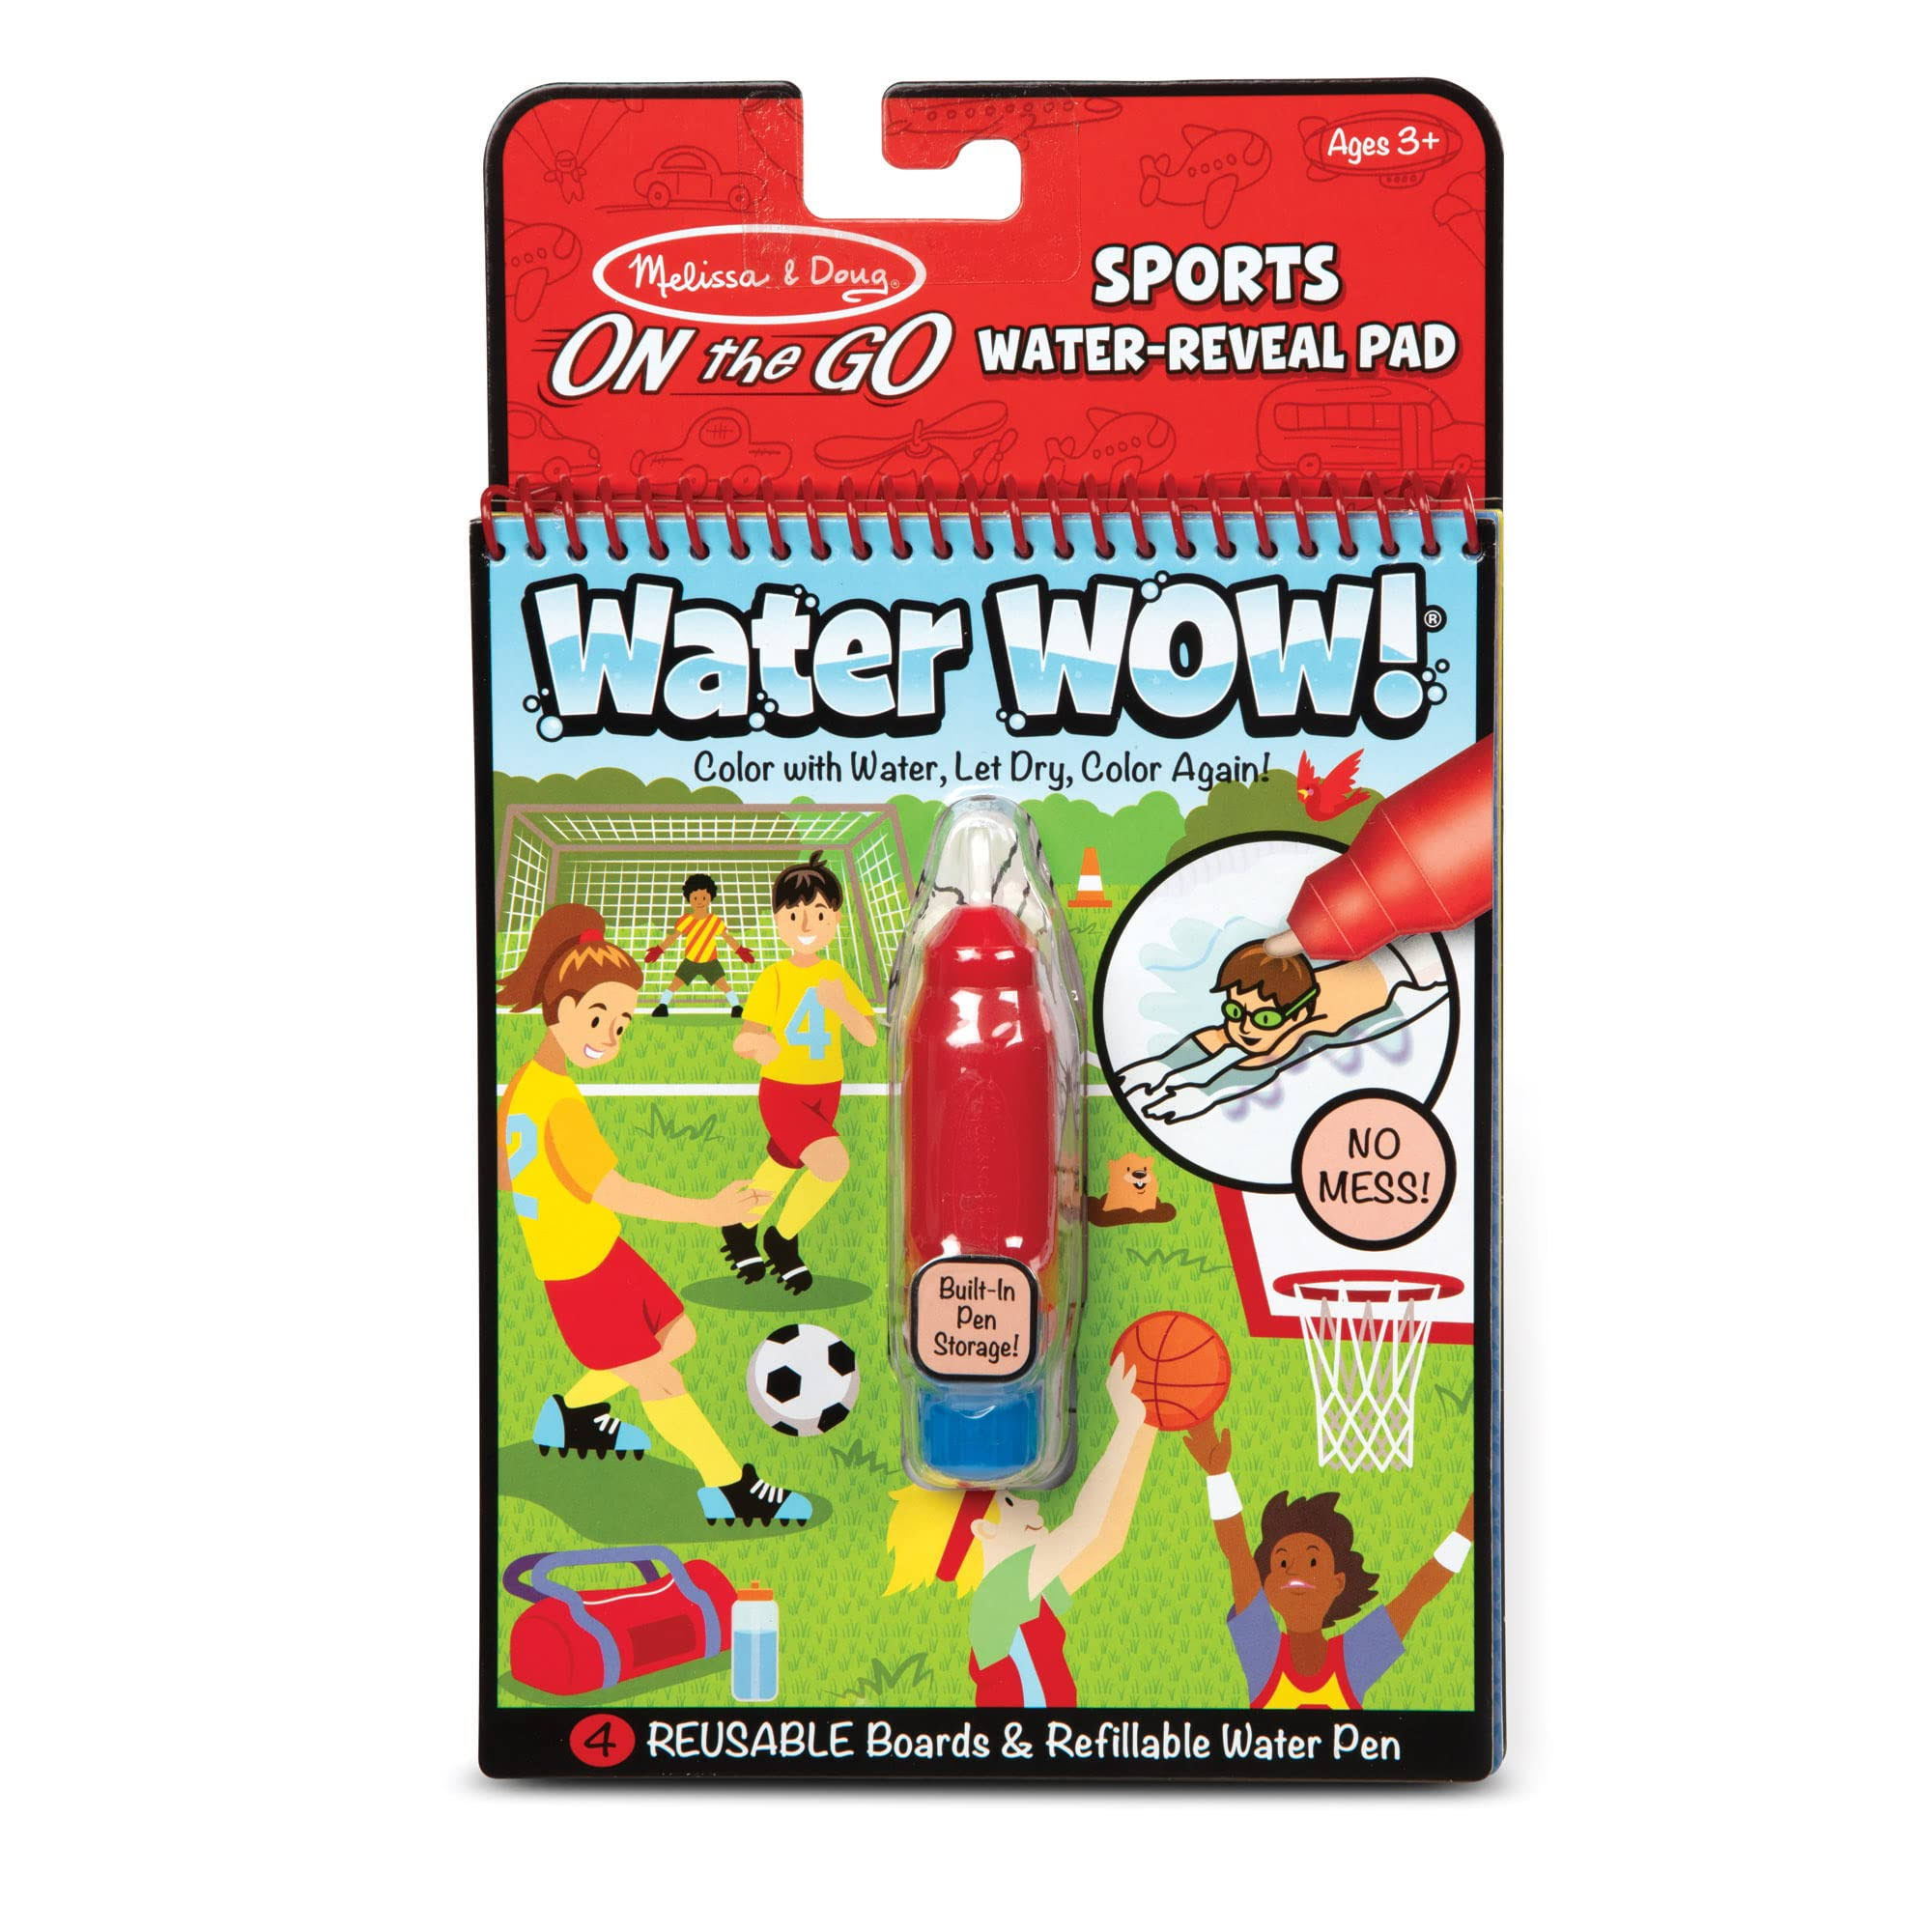 MELISSA & DOUG Water Wow Sports Water Reveal Pad